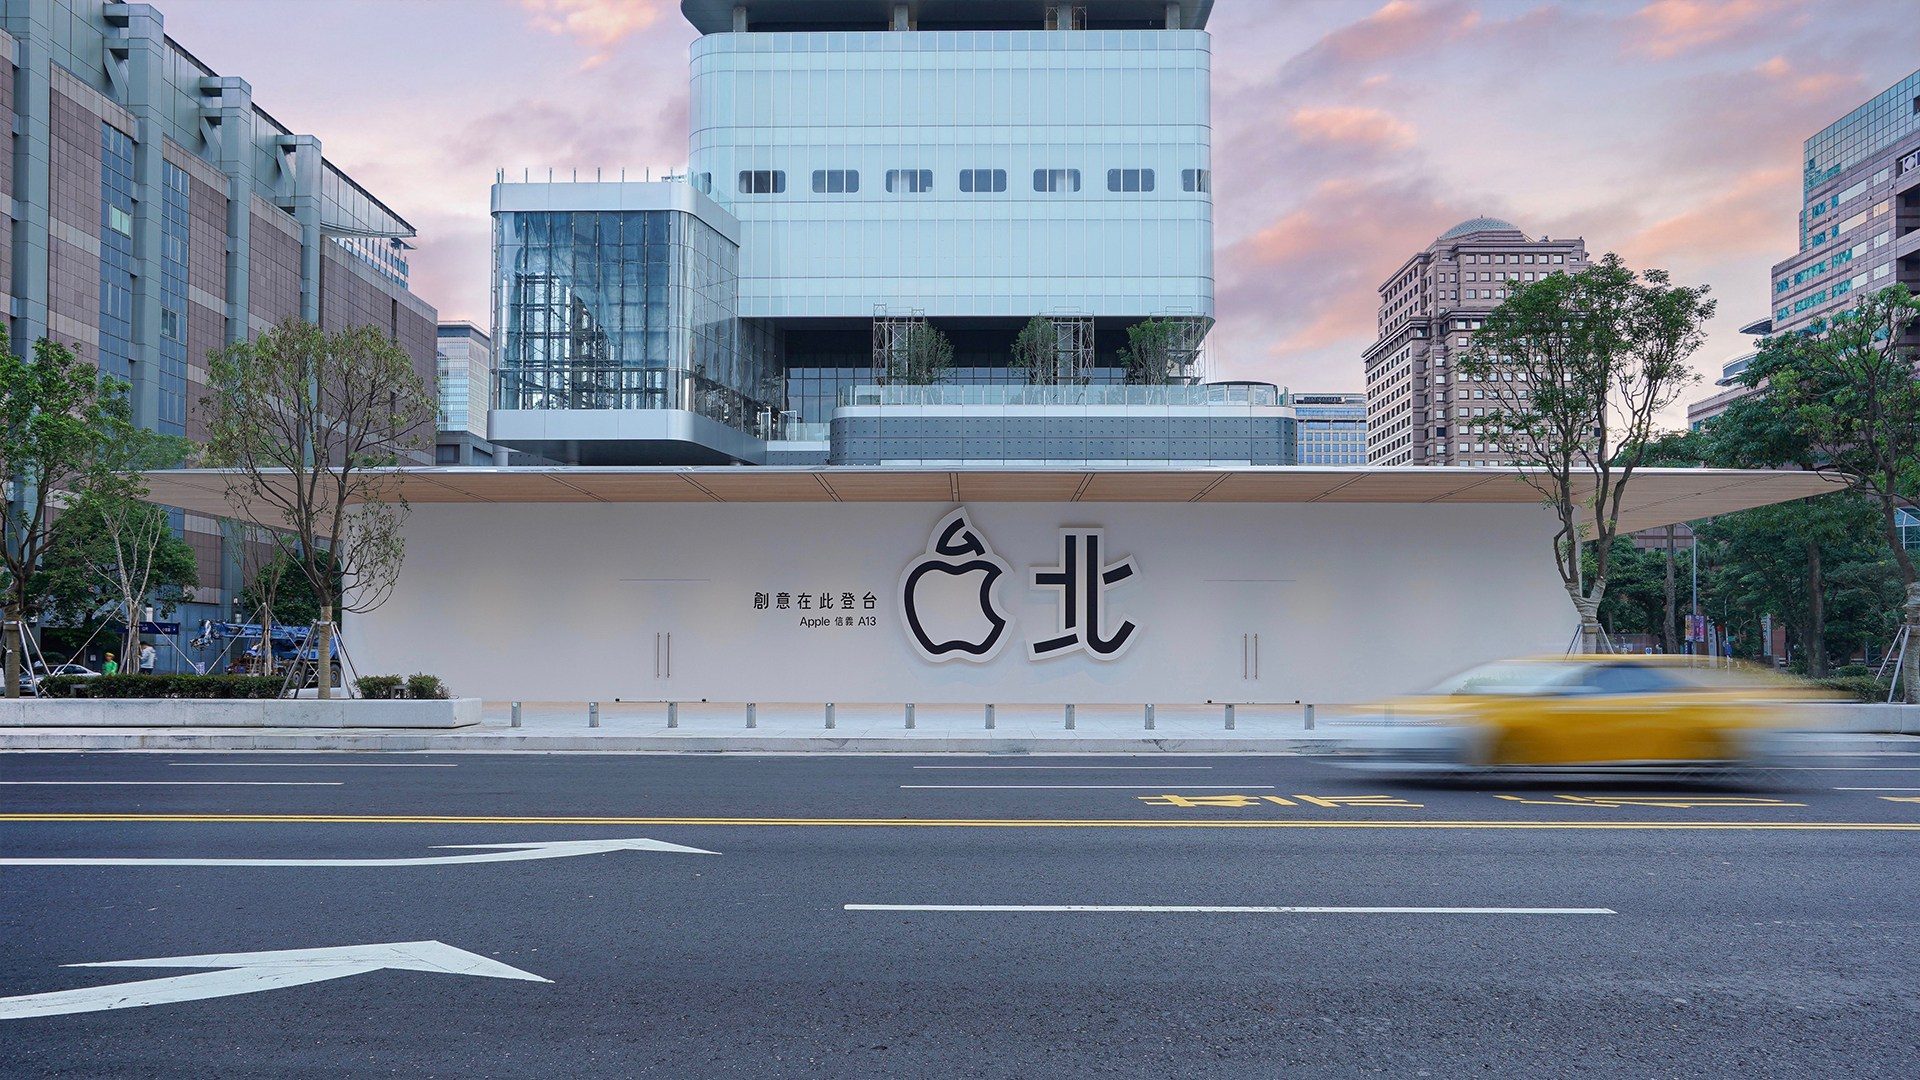 Locations for 1st Apple Store in India are delimited; 2nd store in Taiwan confirmed